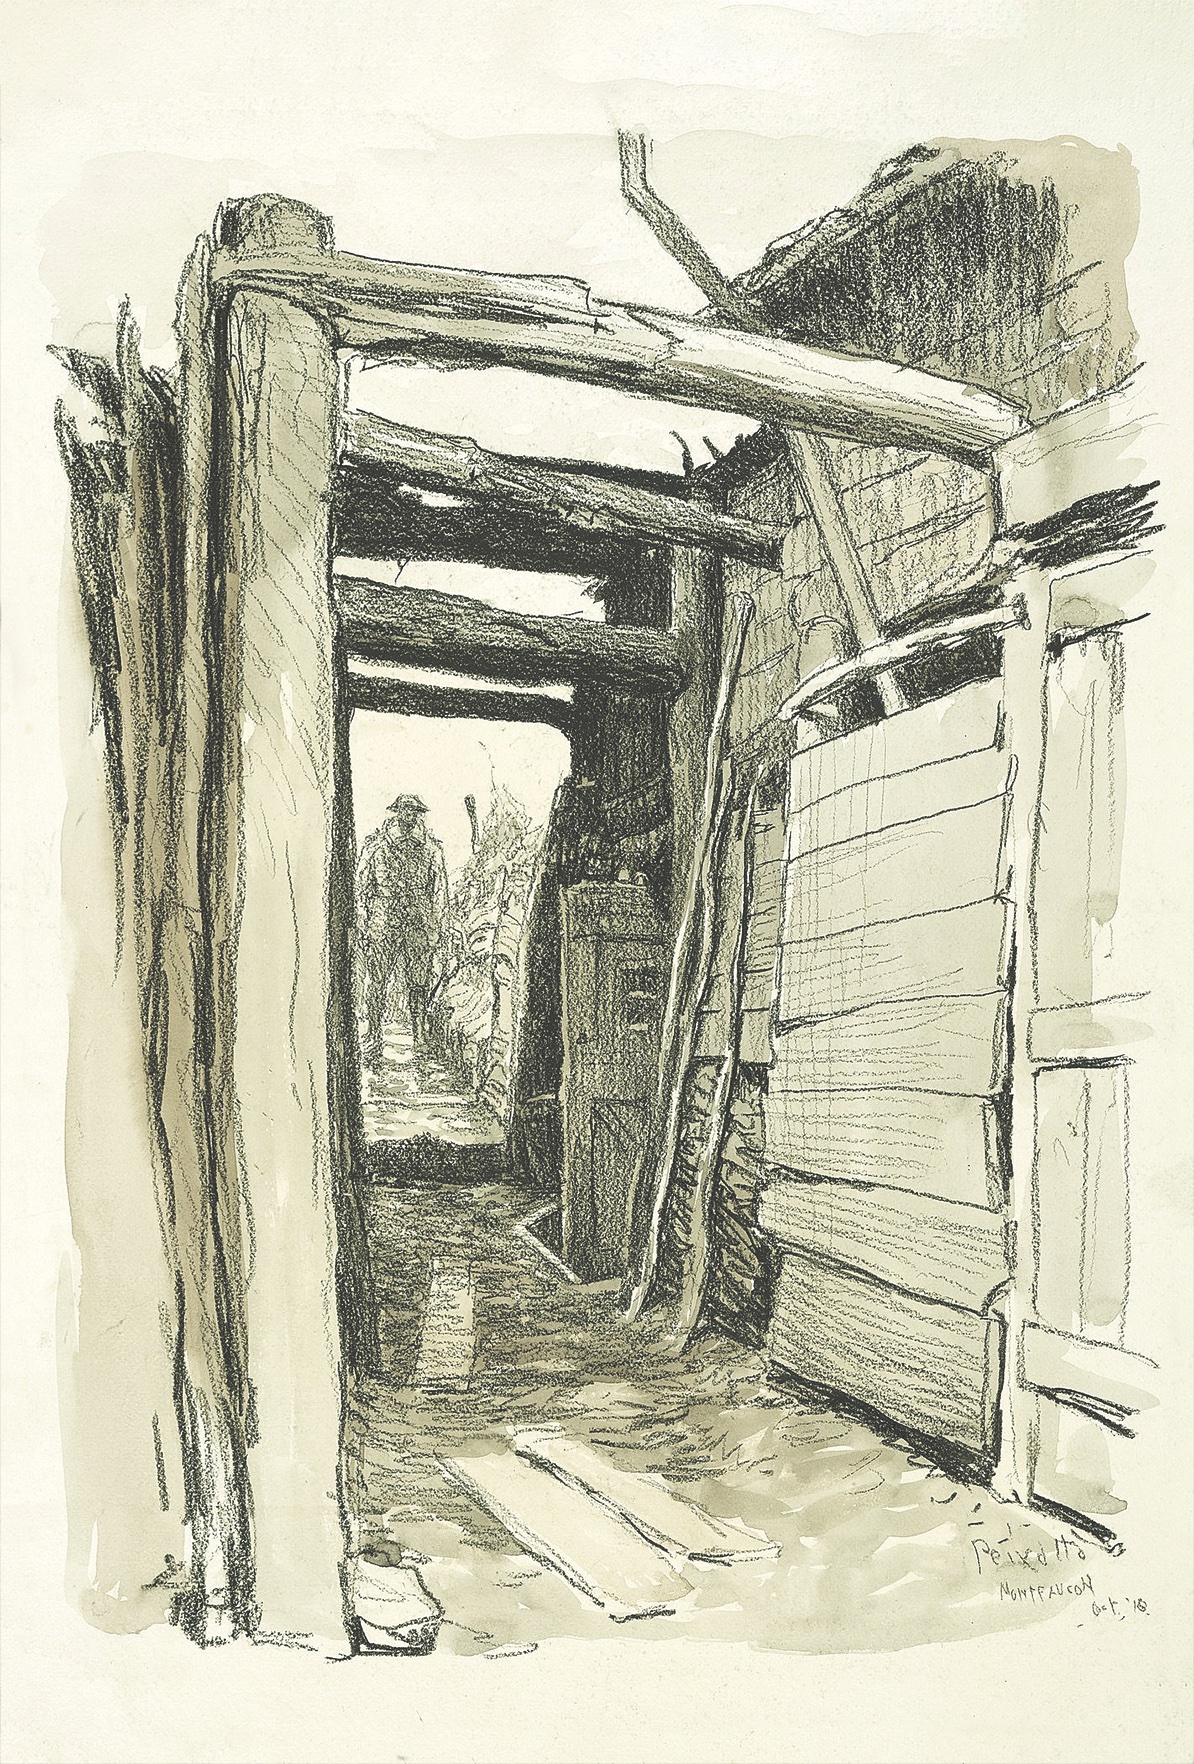 Peixotto’s sketches of an American soldier seen through a German trench. (National Museum of American History, Smithsonian Institution)